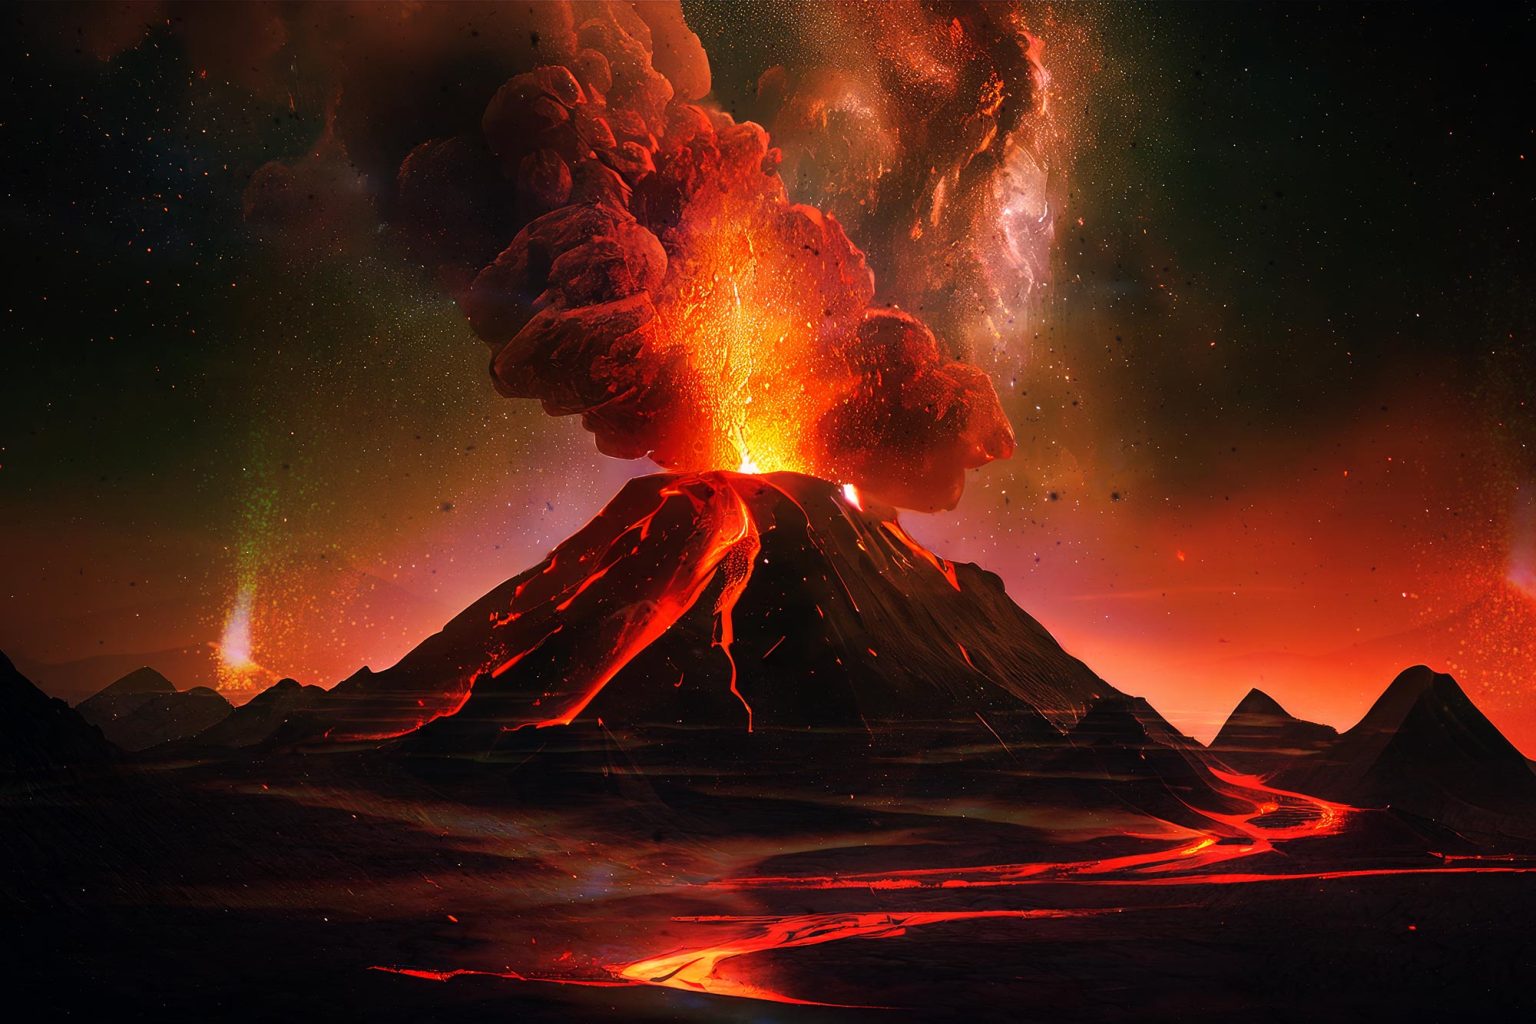 double-trouble-ancient-volcanic-eruptions-unveil-a-fiery-tale-of-twin